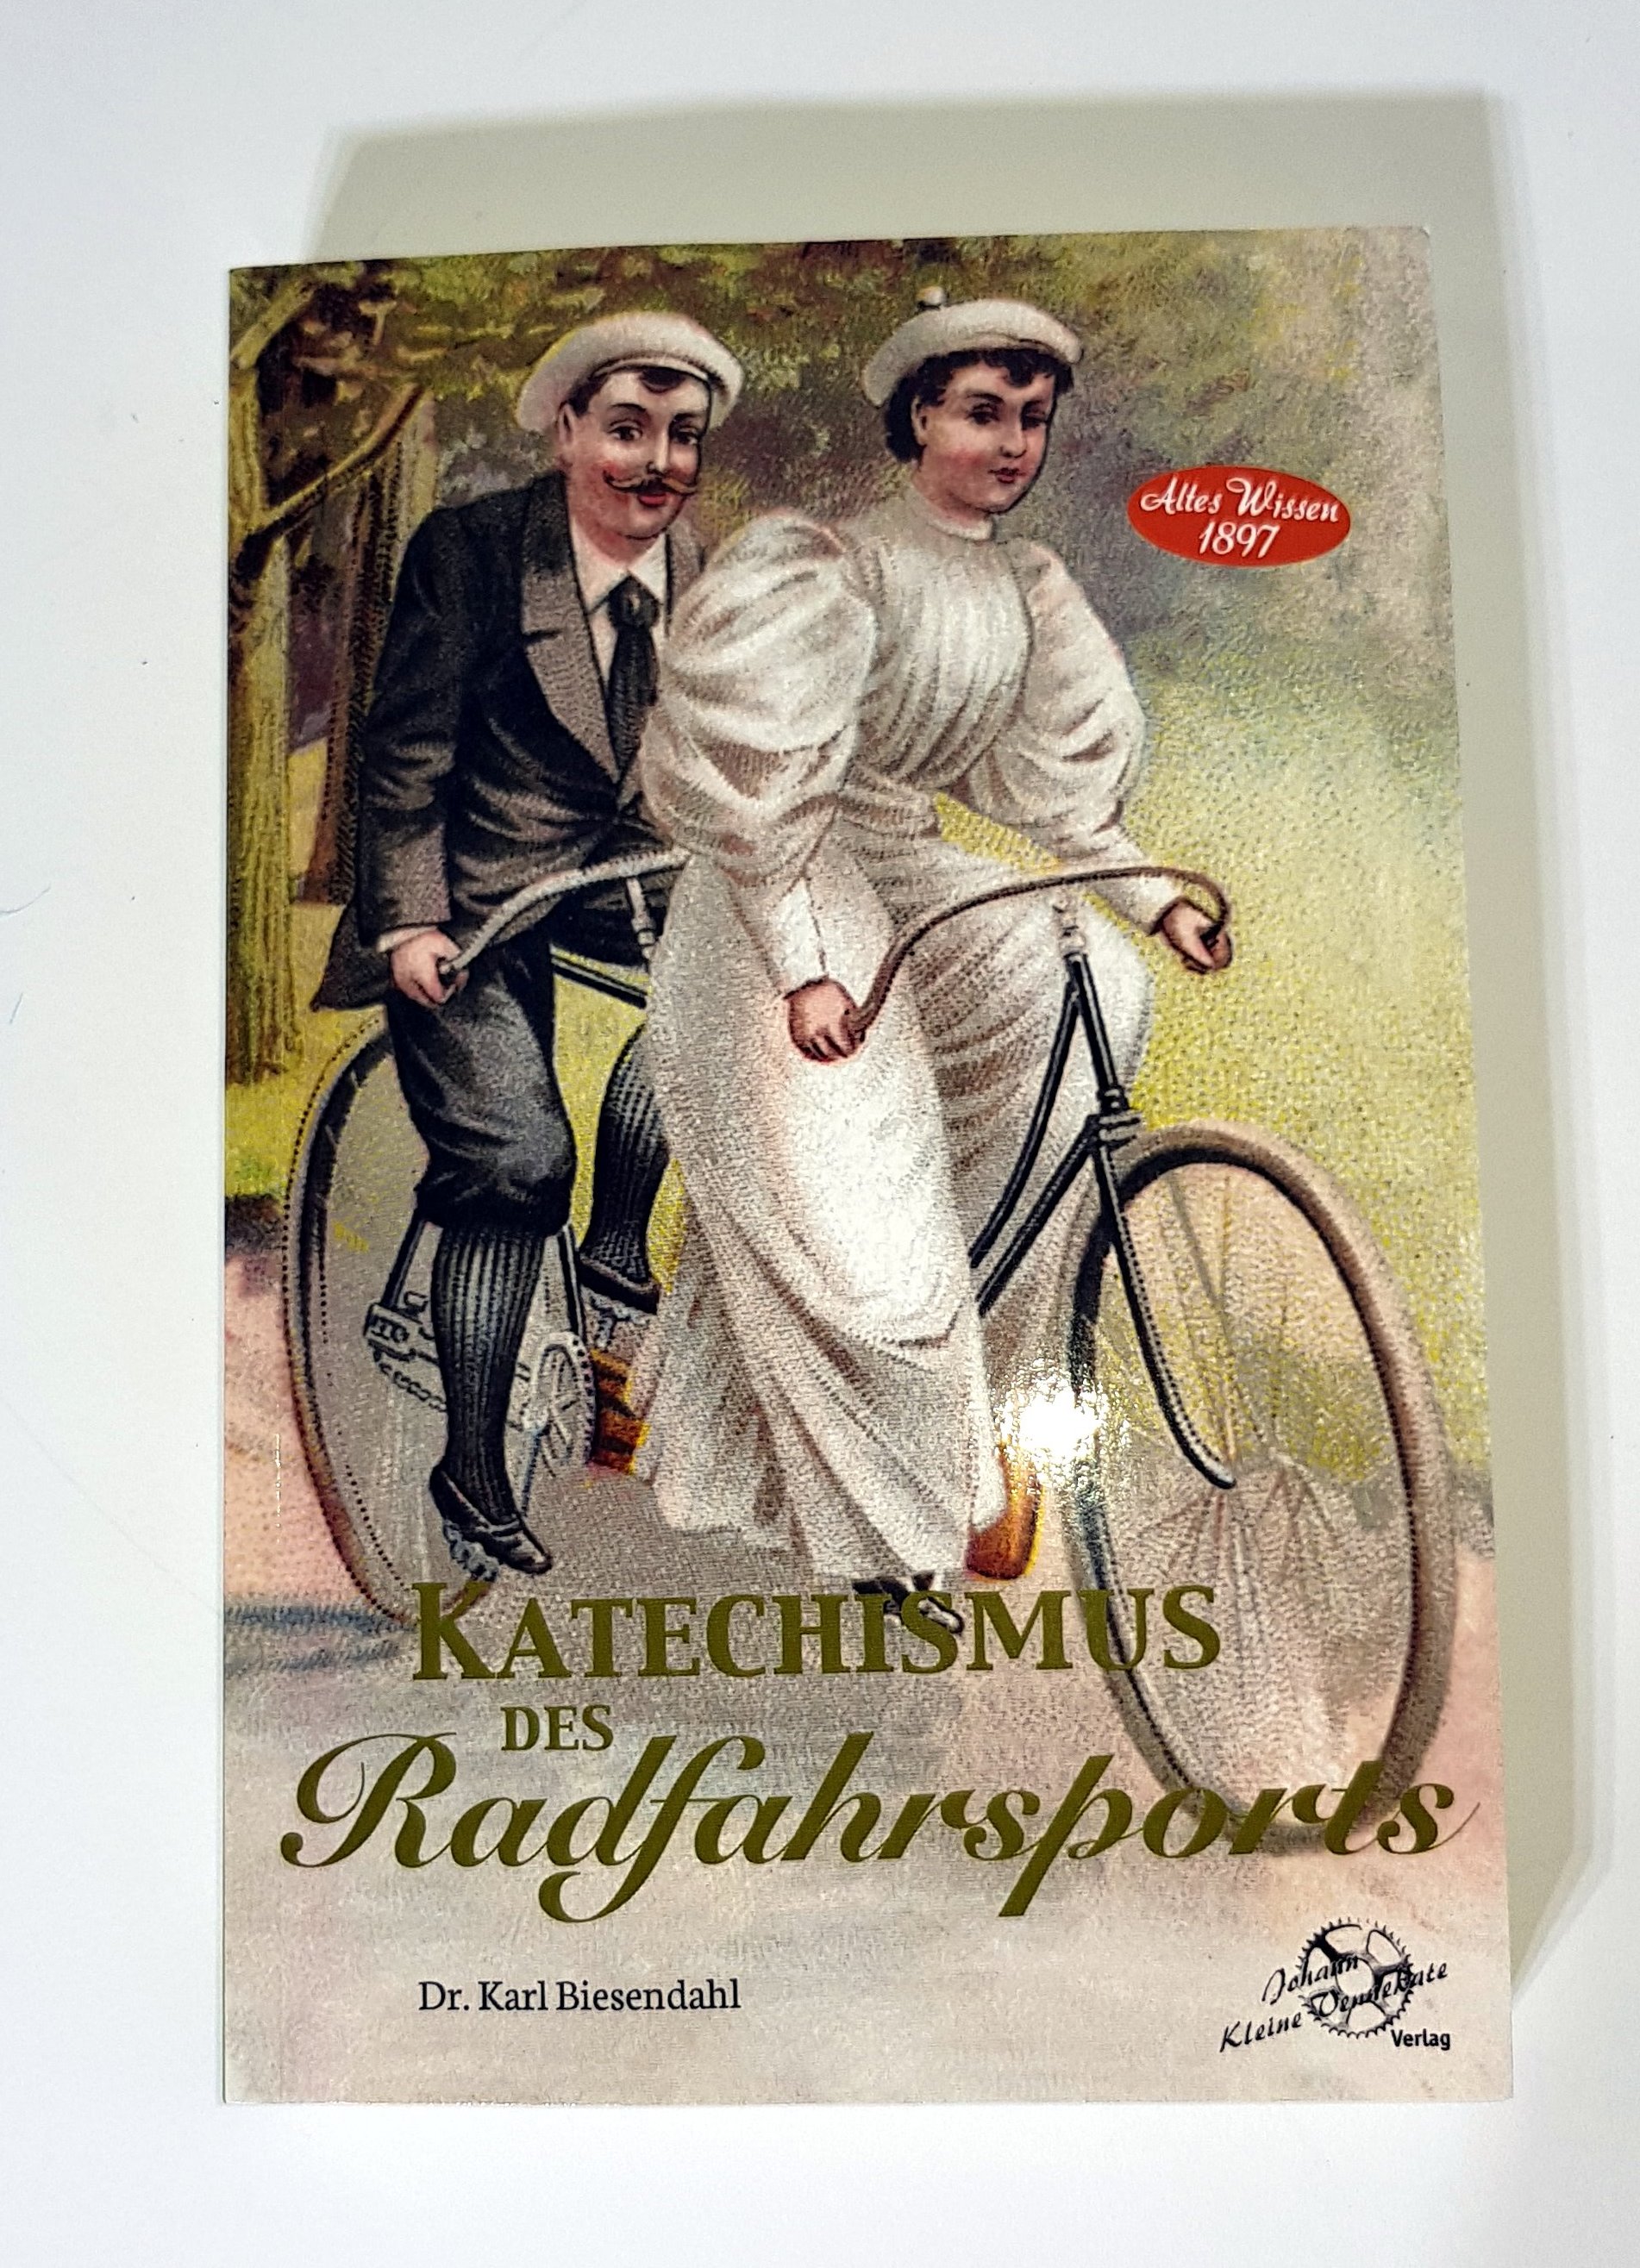 Book Catechism of cycling